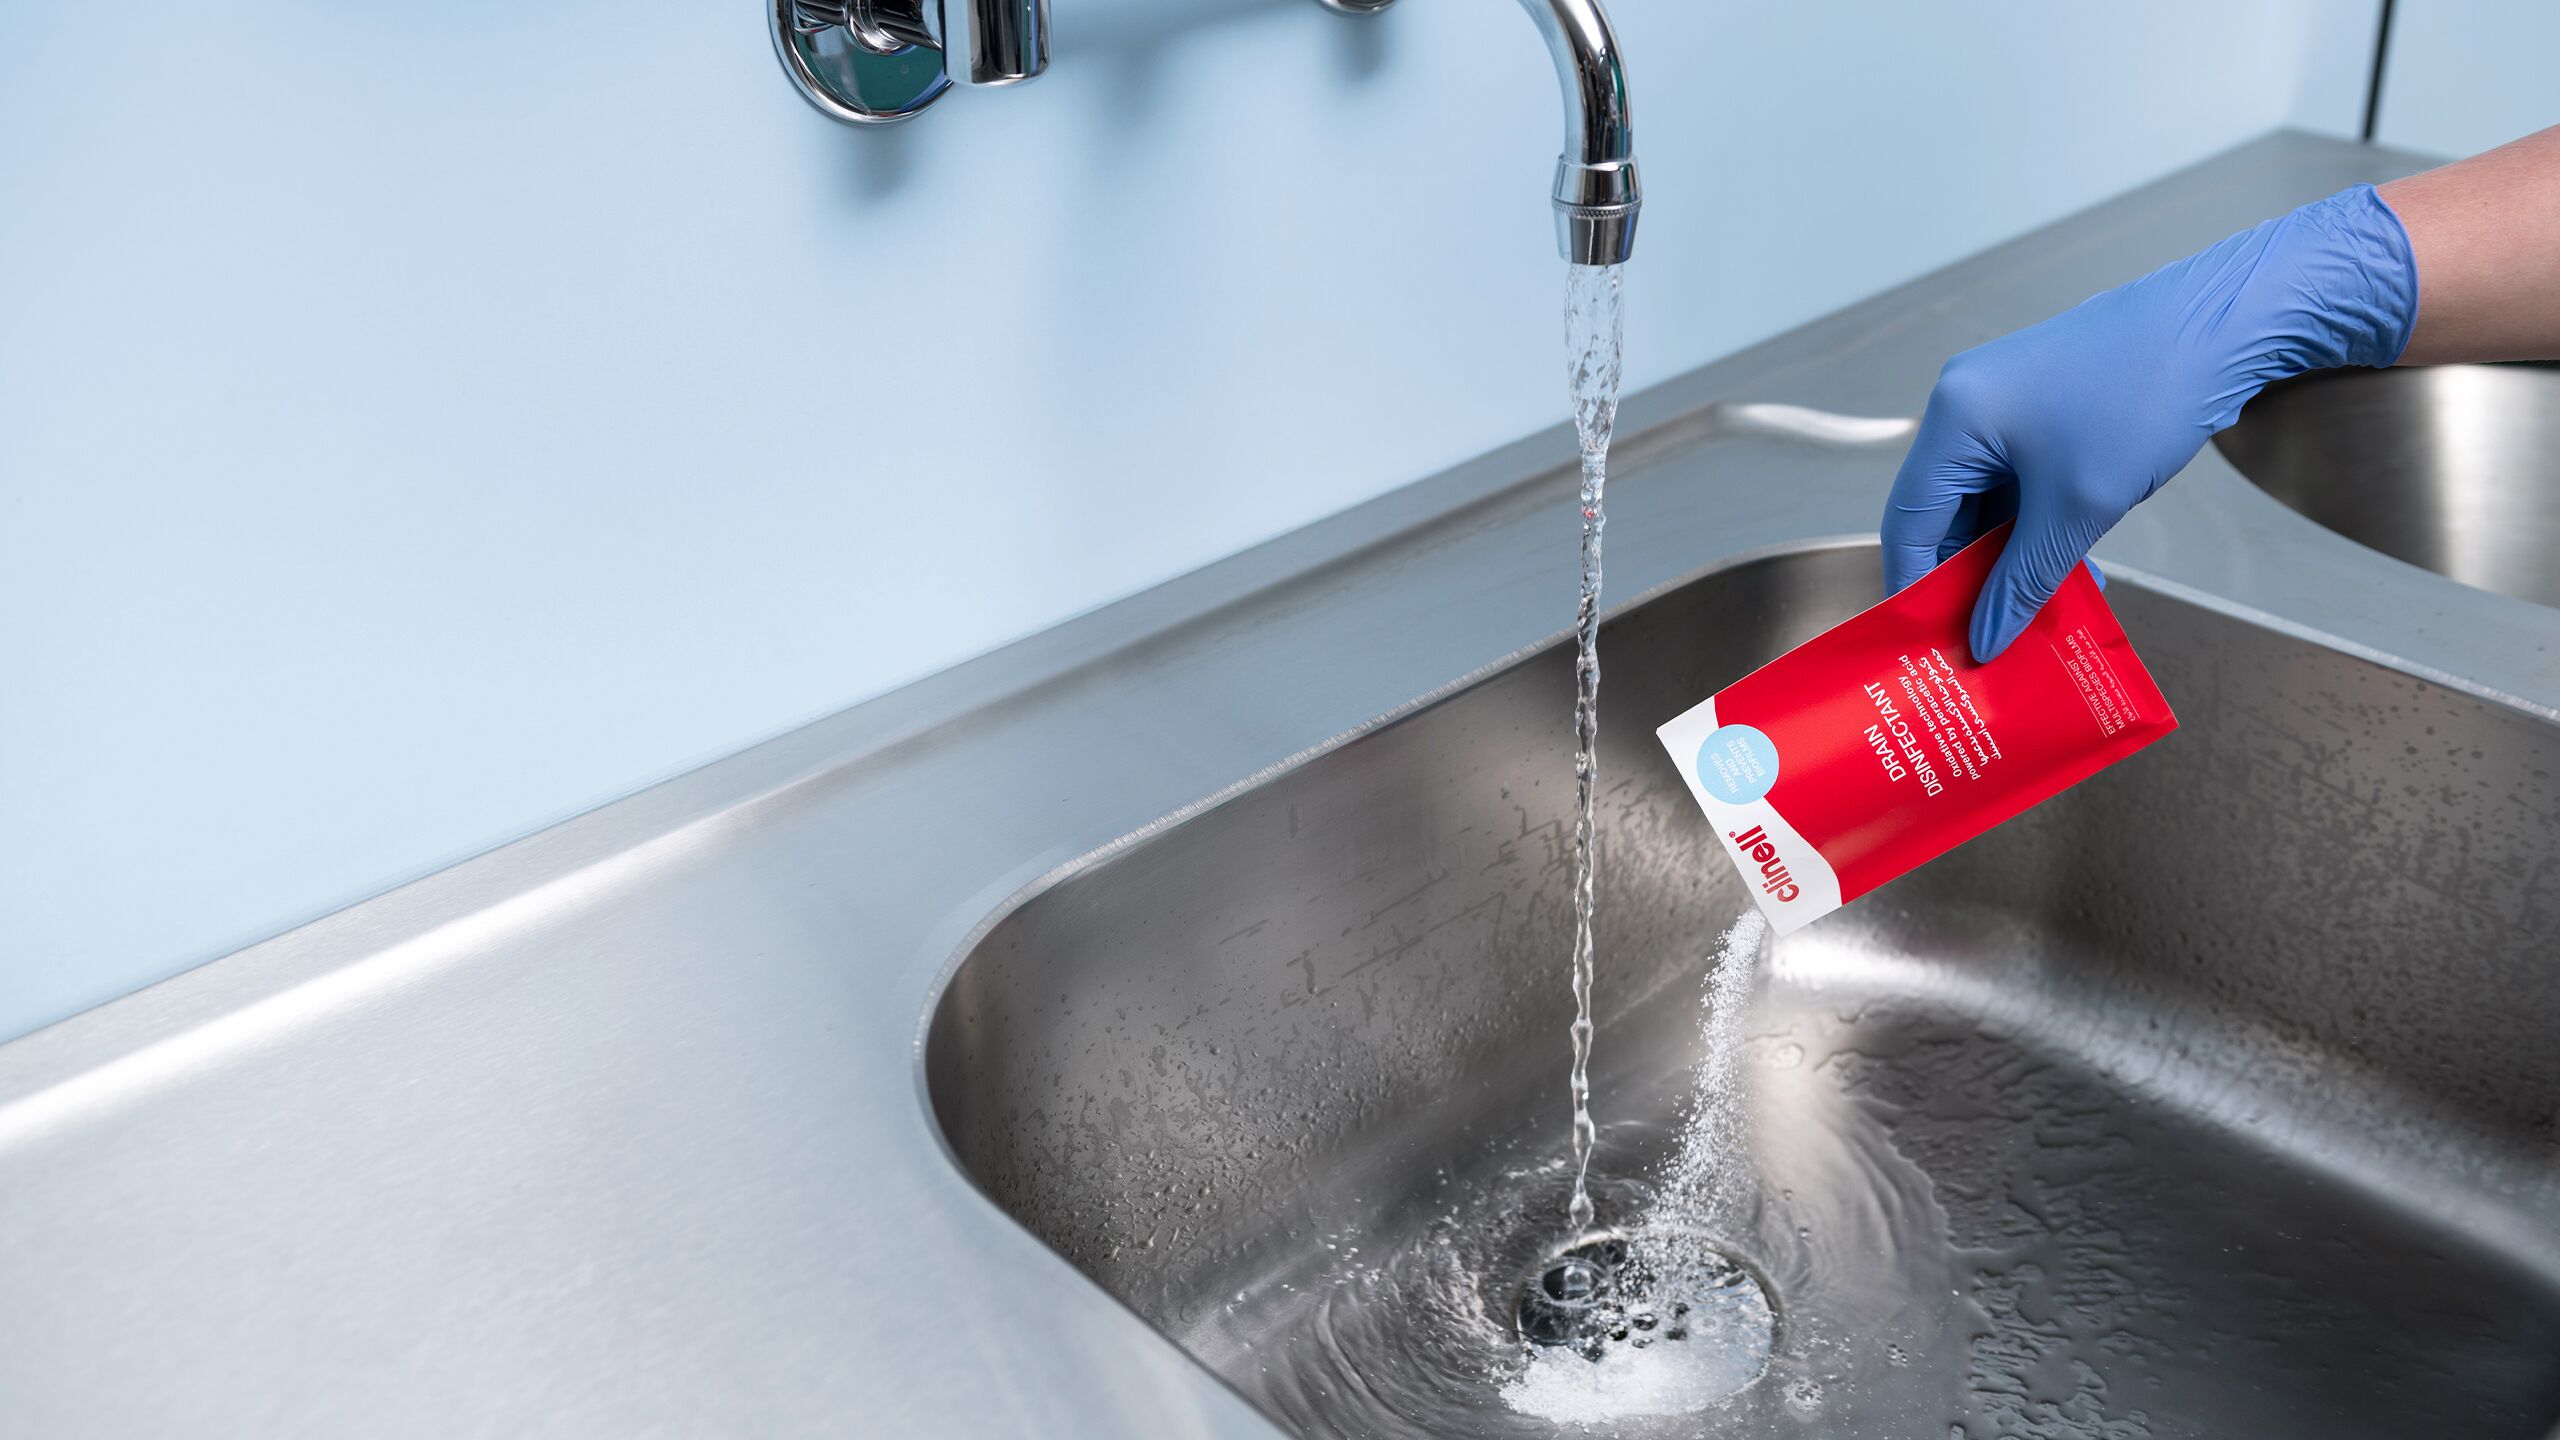 Drain Disinfectant being poured into sink